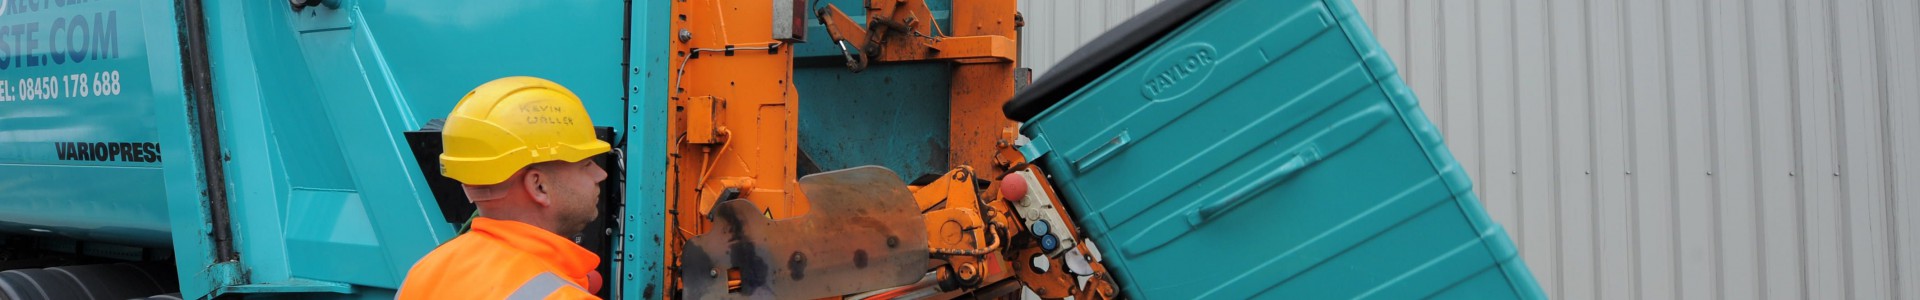 A Premier Waste employee providing waste and recycling services.